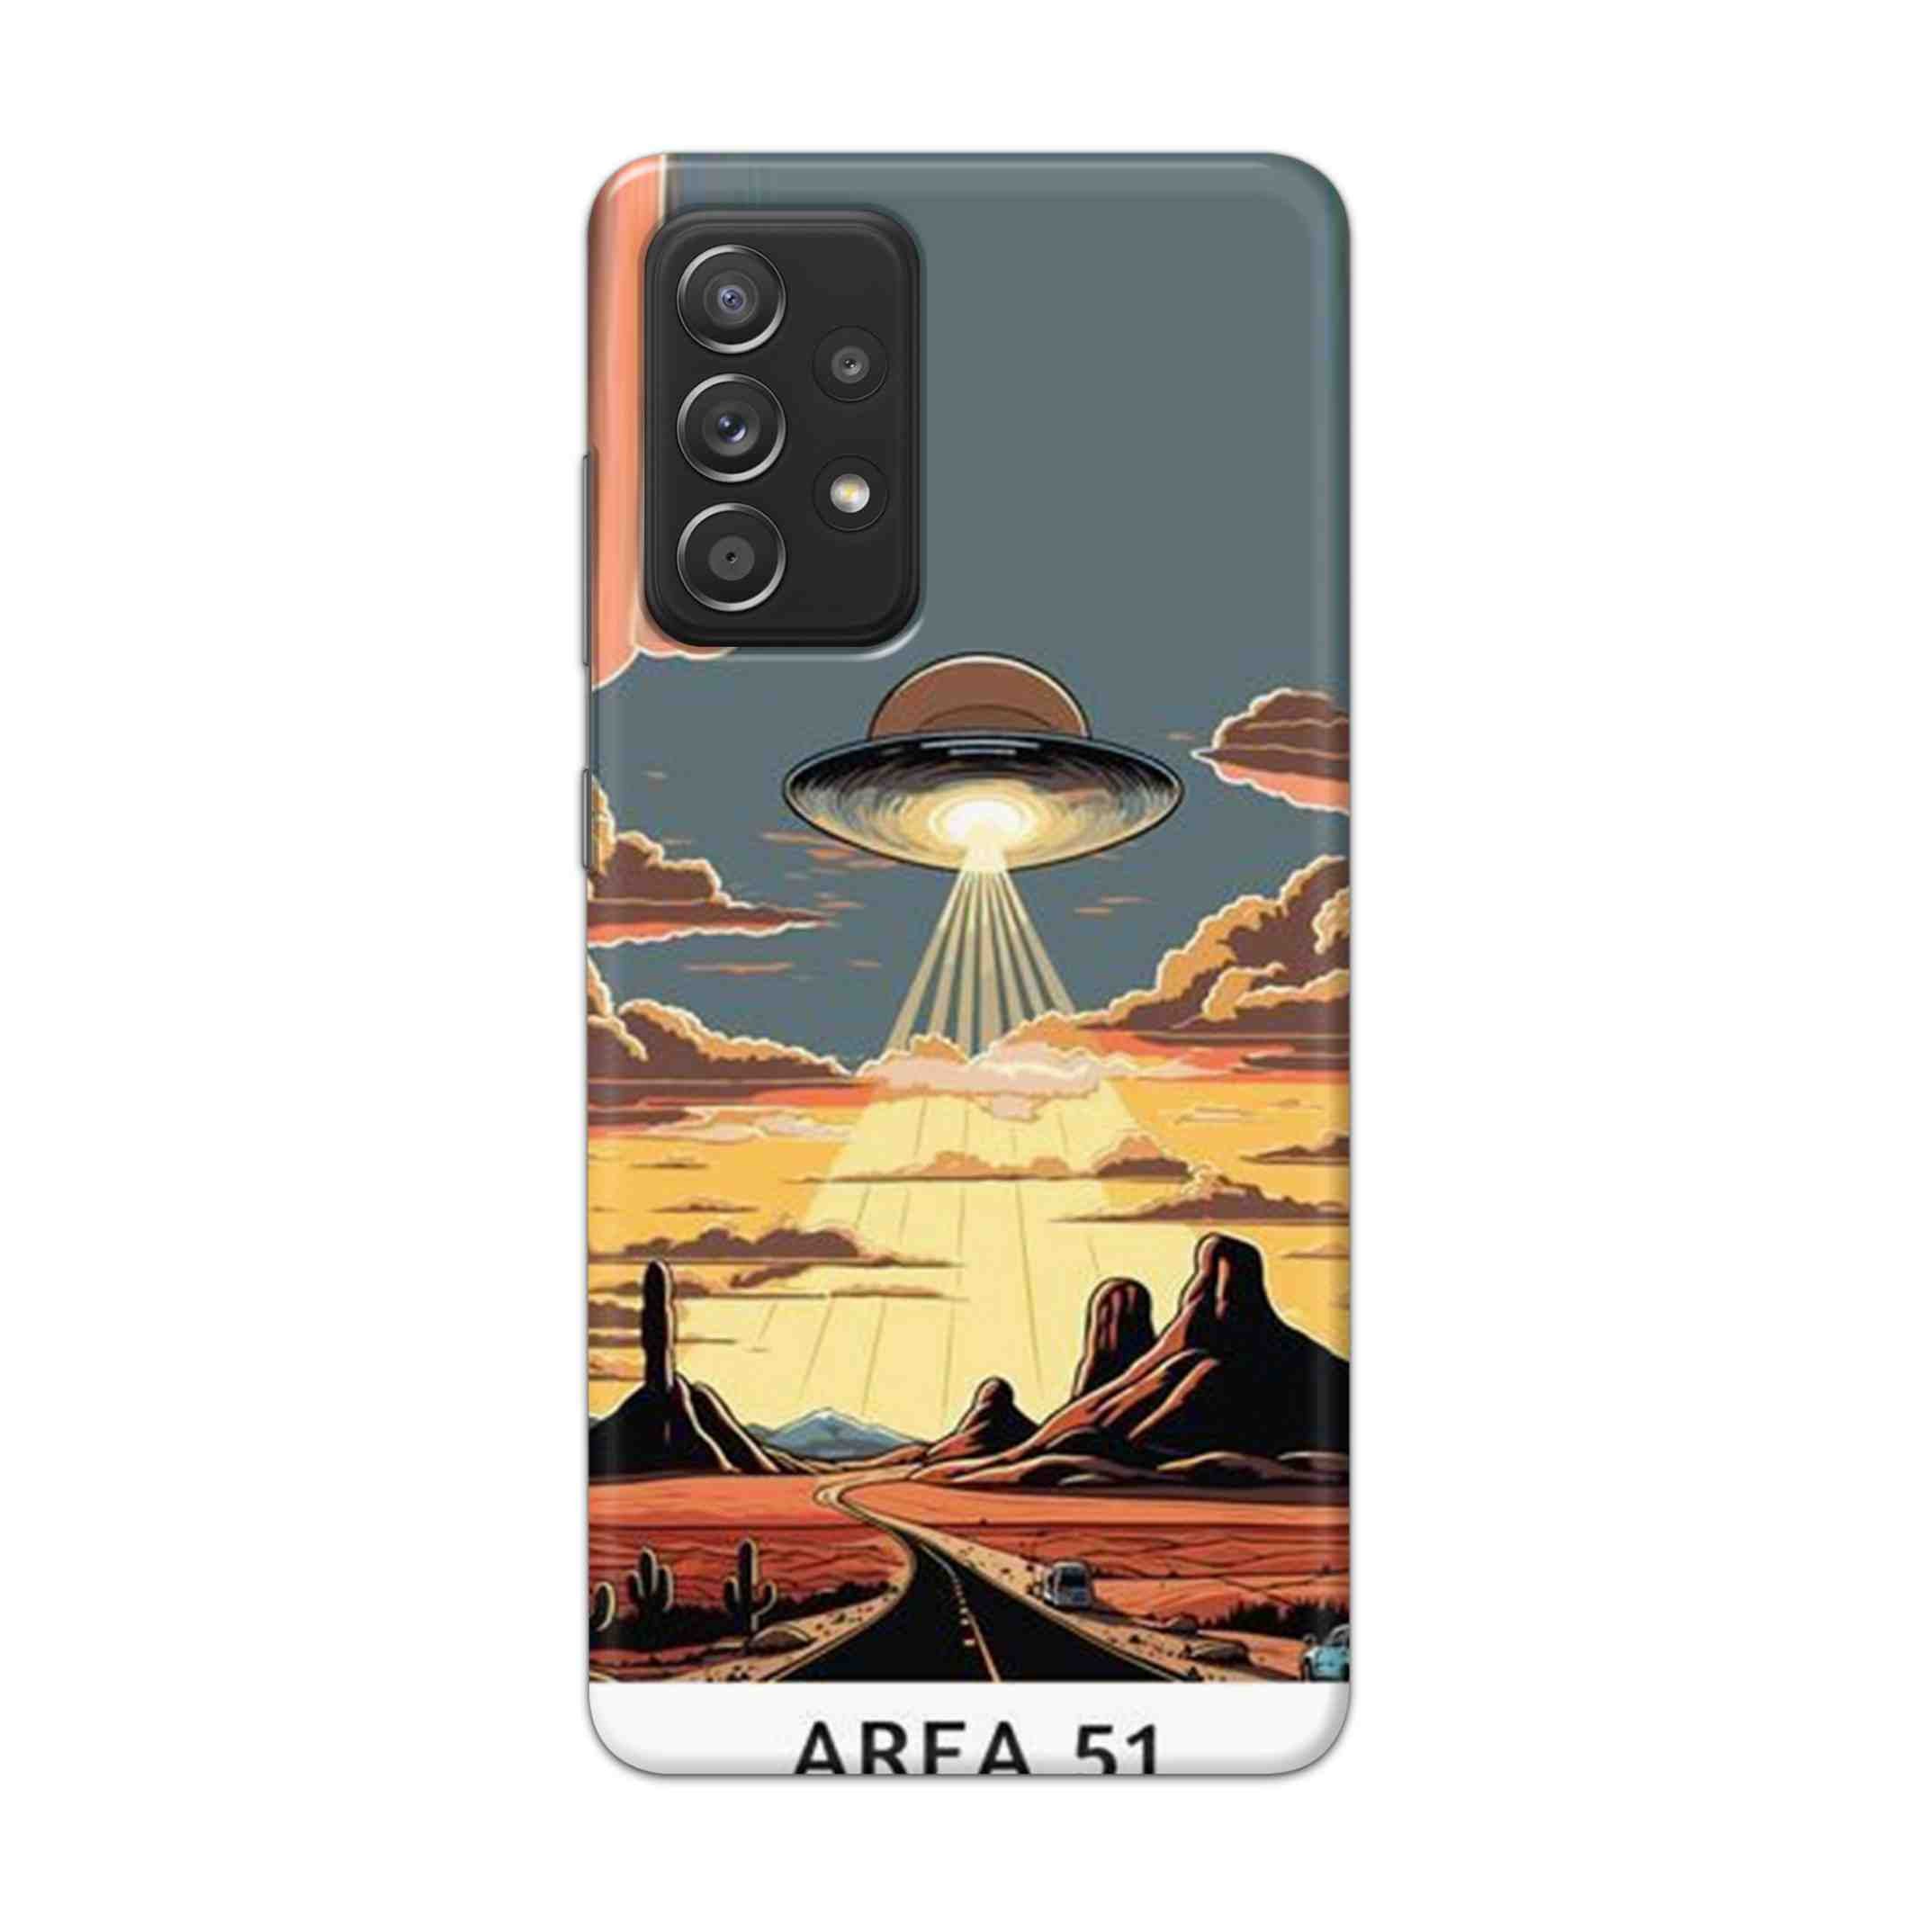 Buy Area 51 Hard Back Mobile Phone Case Cover For Samsung Galaxy A52 Online